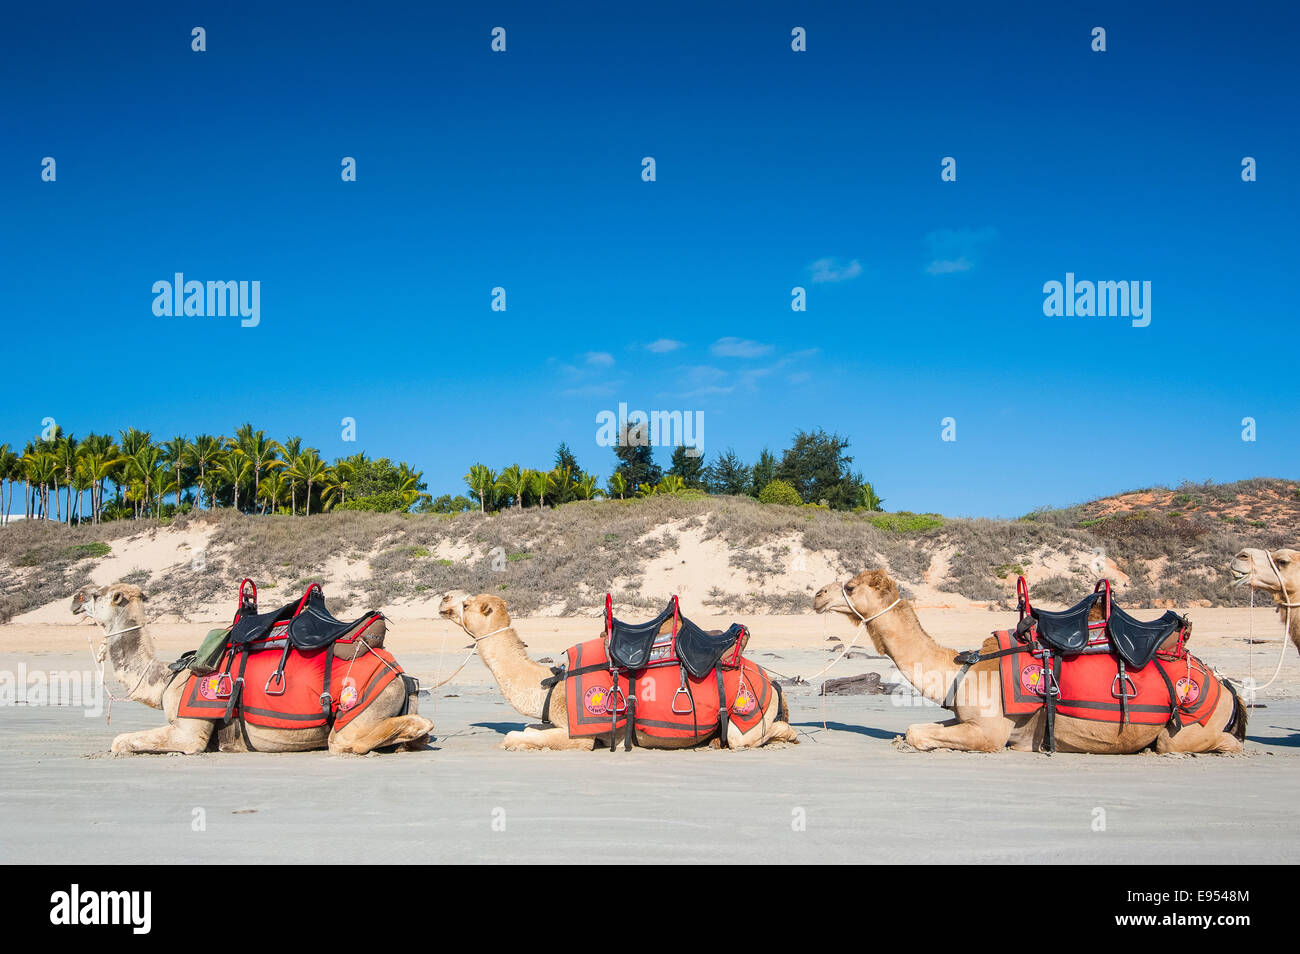 Camels prepared for tourists on Cable Beach, Broome, Western Australia Stock Photo